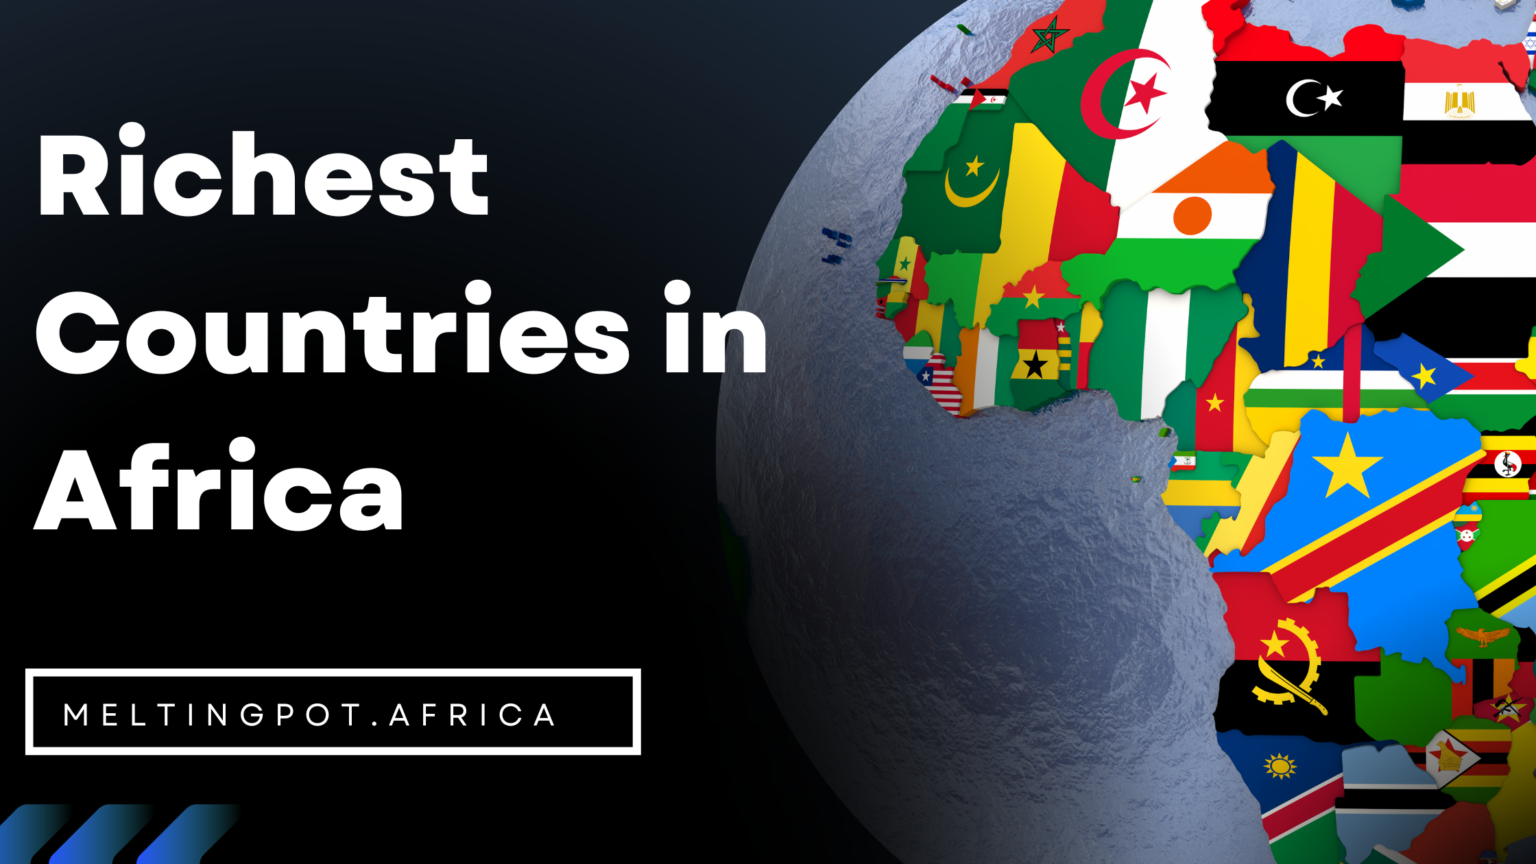 Top 10 Richest Countries in Africa Based on GDP & GNI | meltingpot.africa